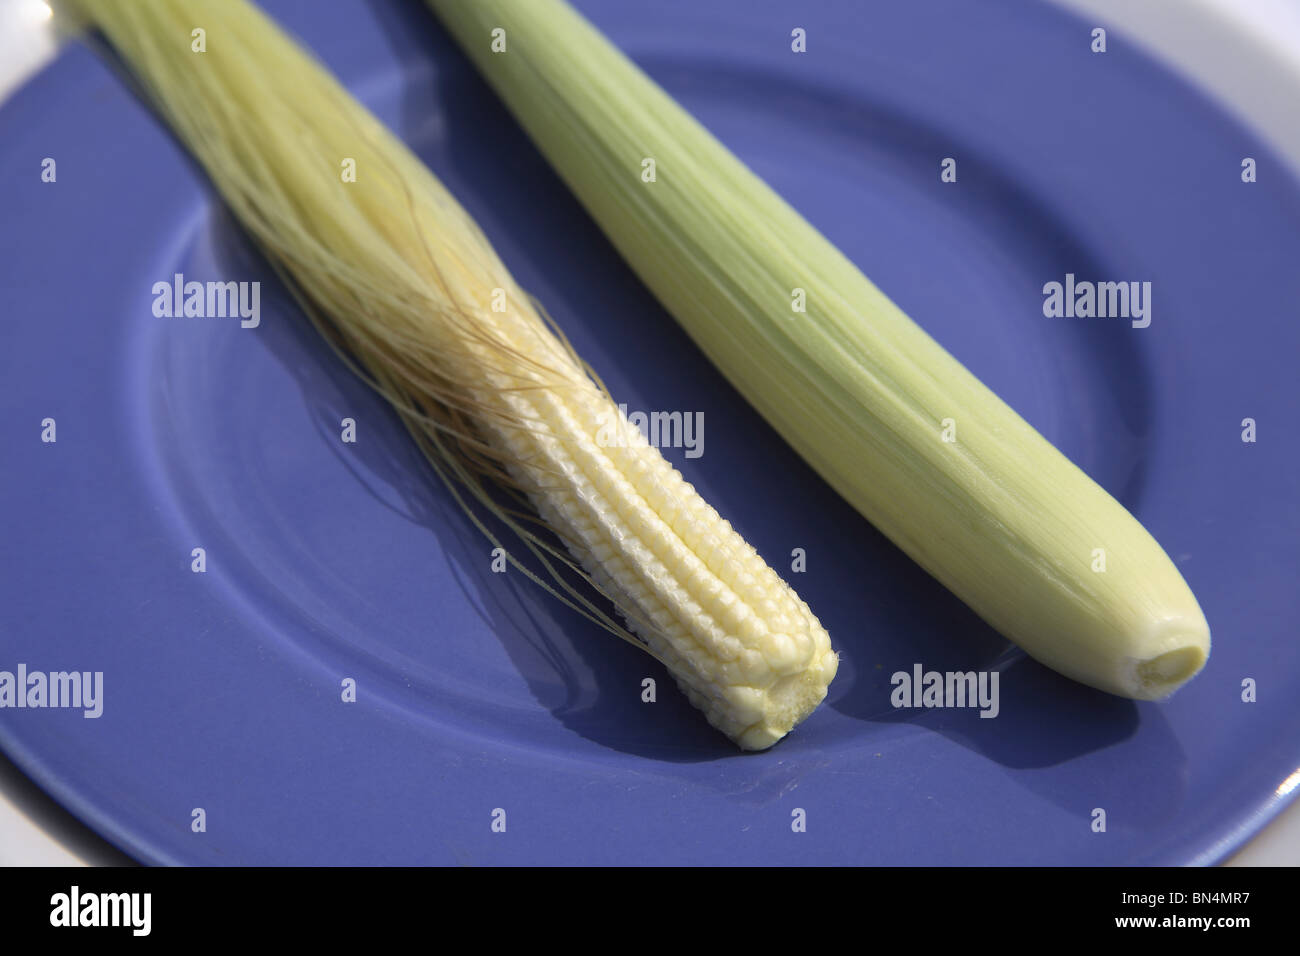 Crop ; Baby Corn kept in blue plate ; Maize ; Zea mays ; Used in Salads or vegetables ; India Stock Photo